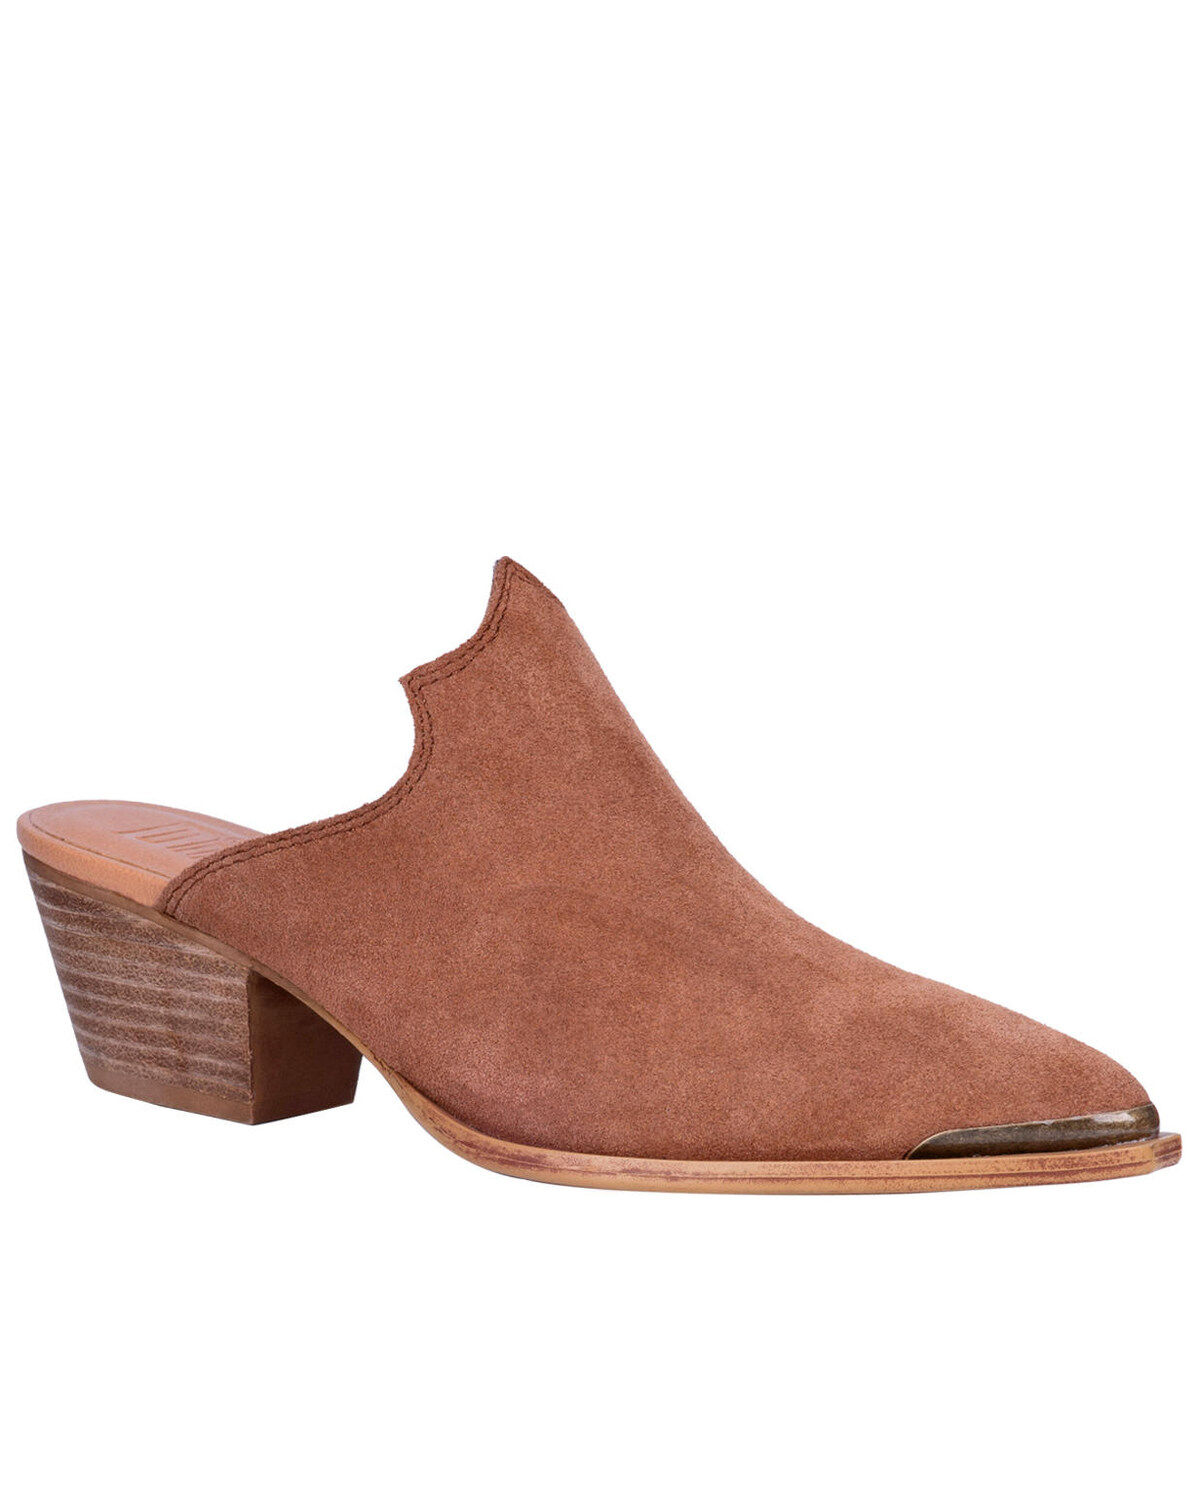 slip on clogs and mules